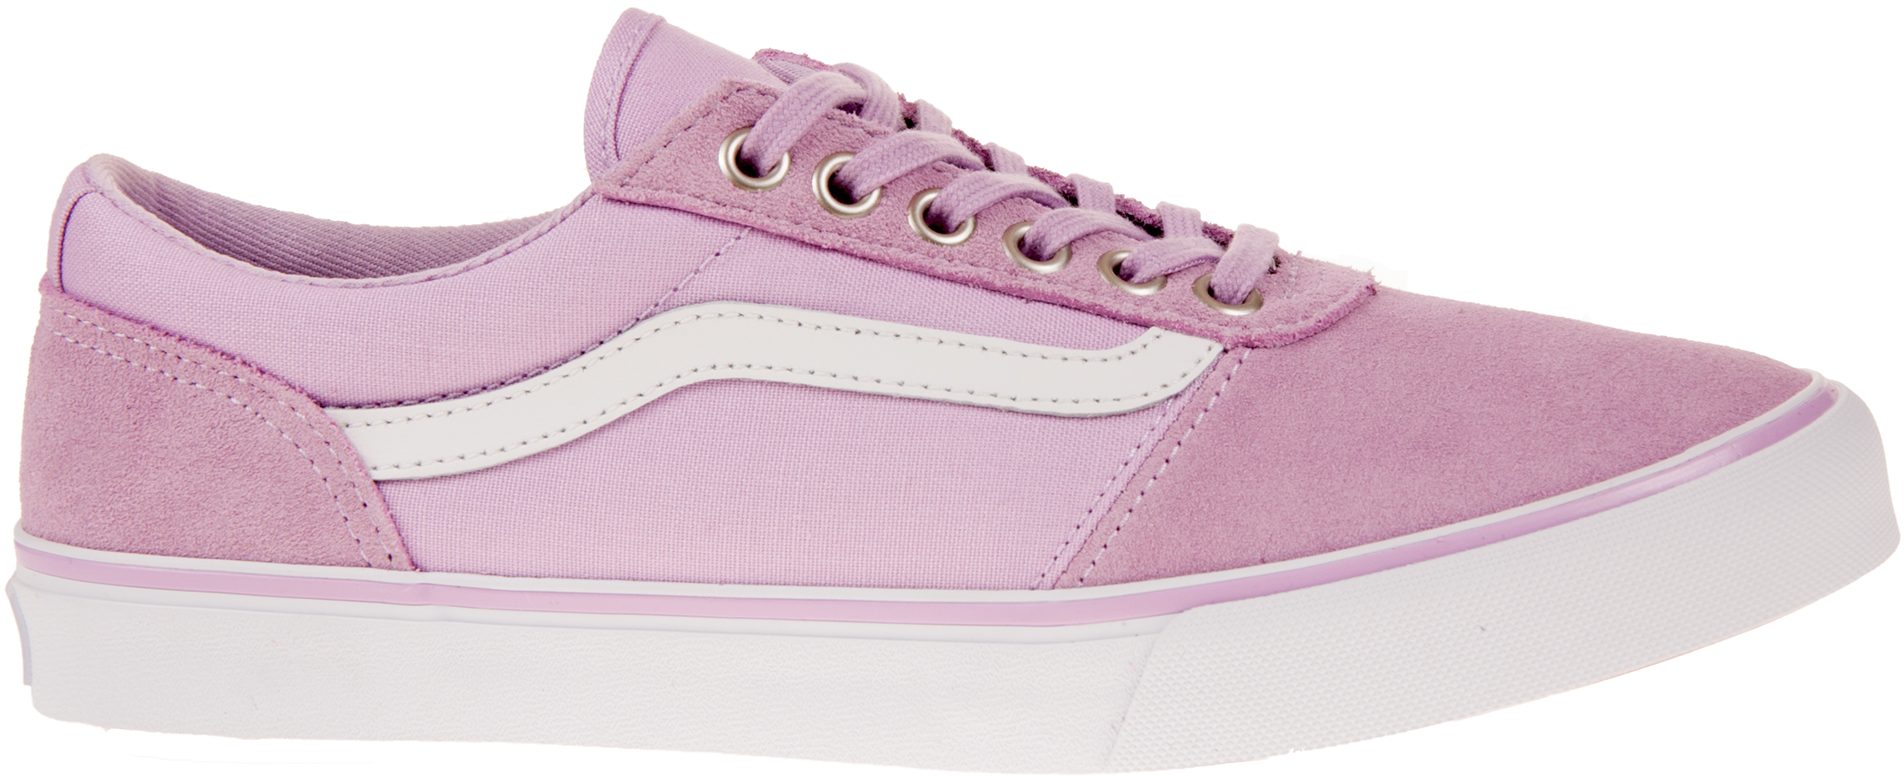 Vans Maddie Lilac VN0A3IL2R6Z - Womens Trainers - Humphries Shoes